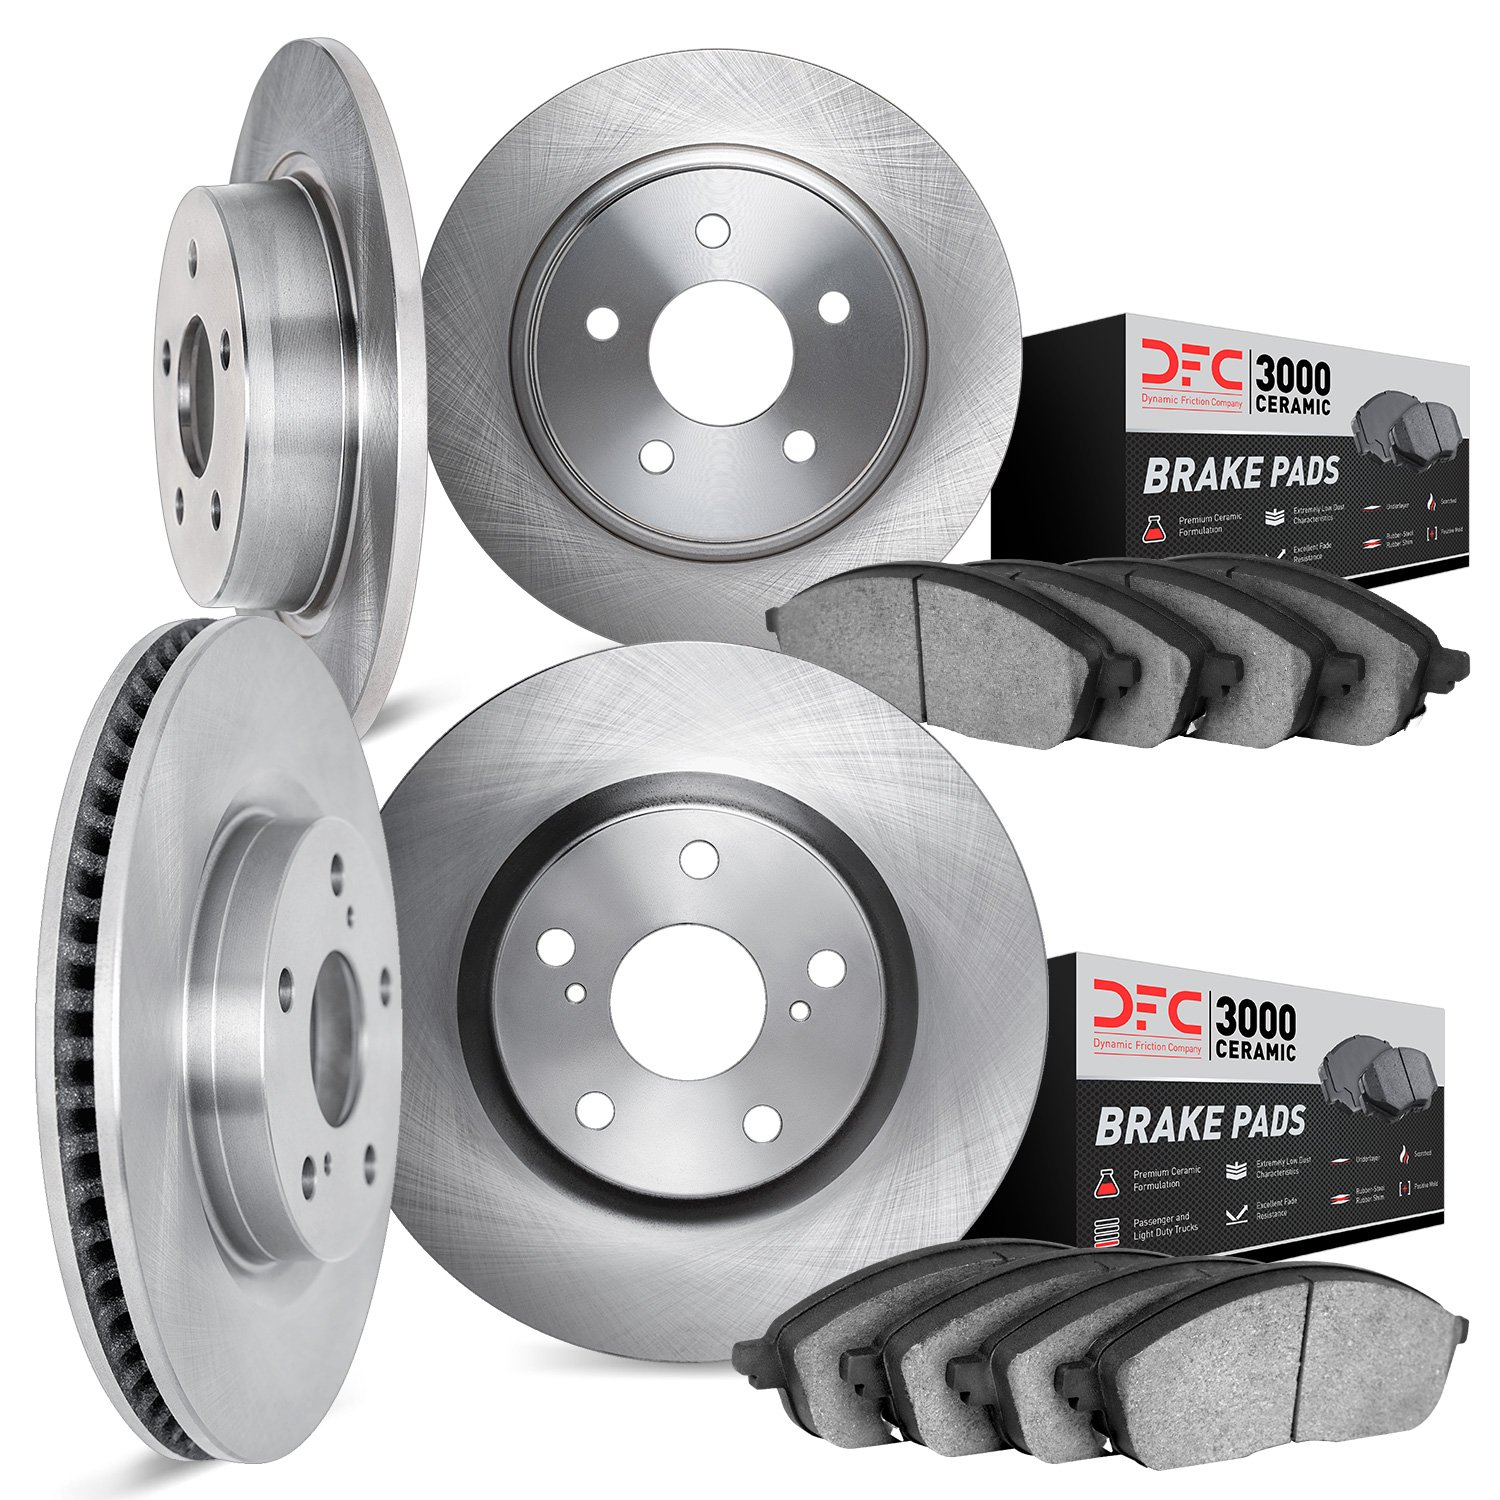 6304-76058 Brake Rotors with 3000-Series Ceramic Brake Pads Kit, 2004-2004 Lexus/Toyota/Scion, Position: Front and Rear